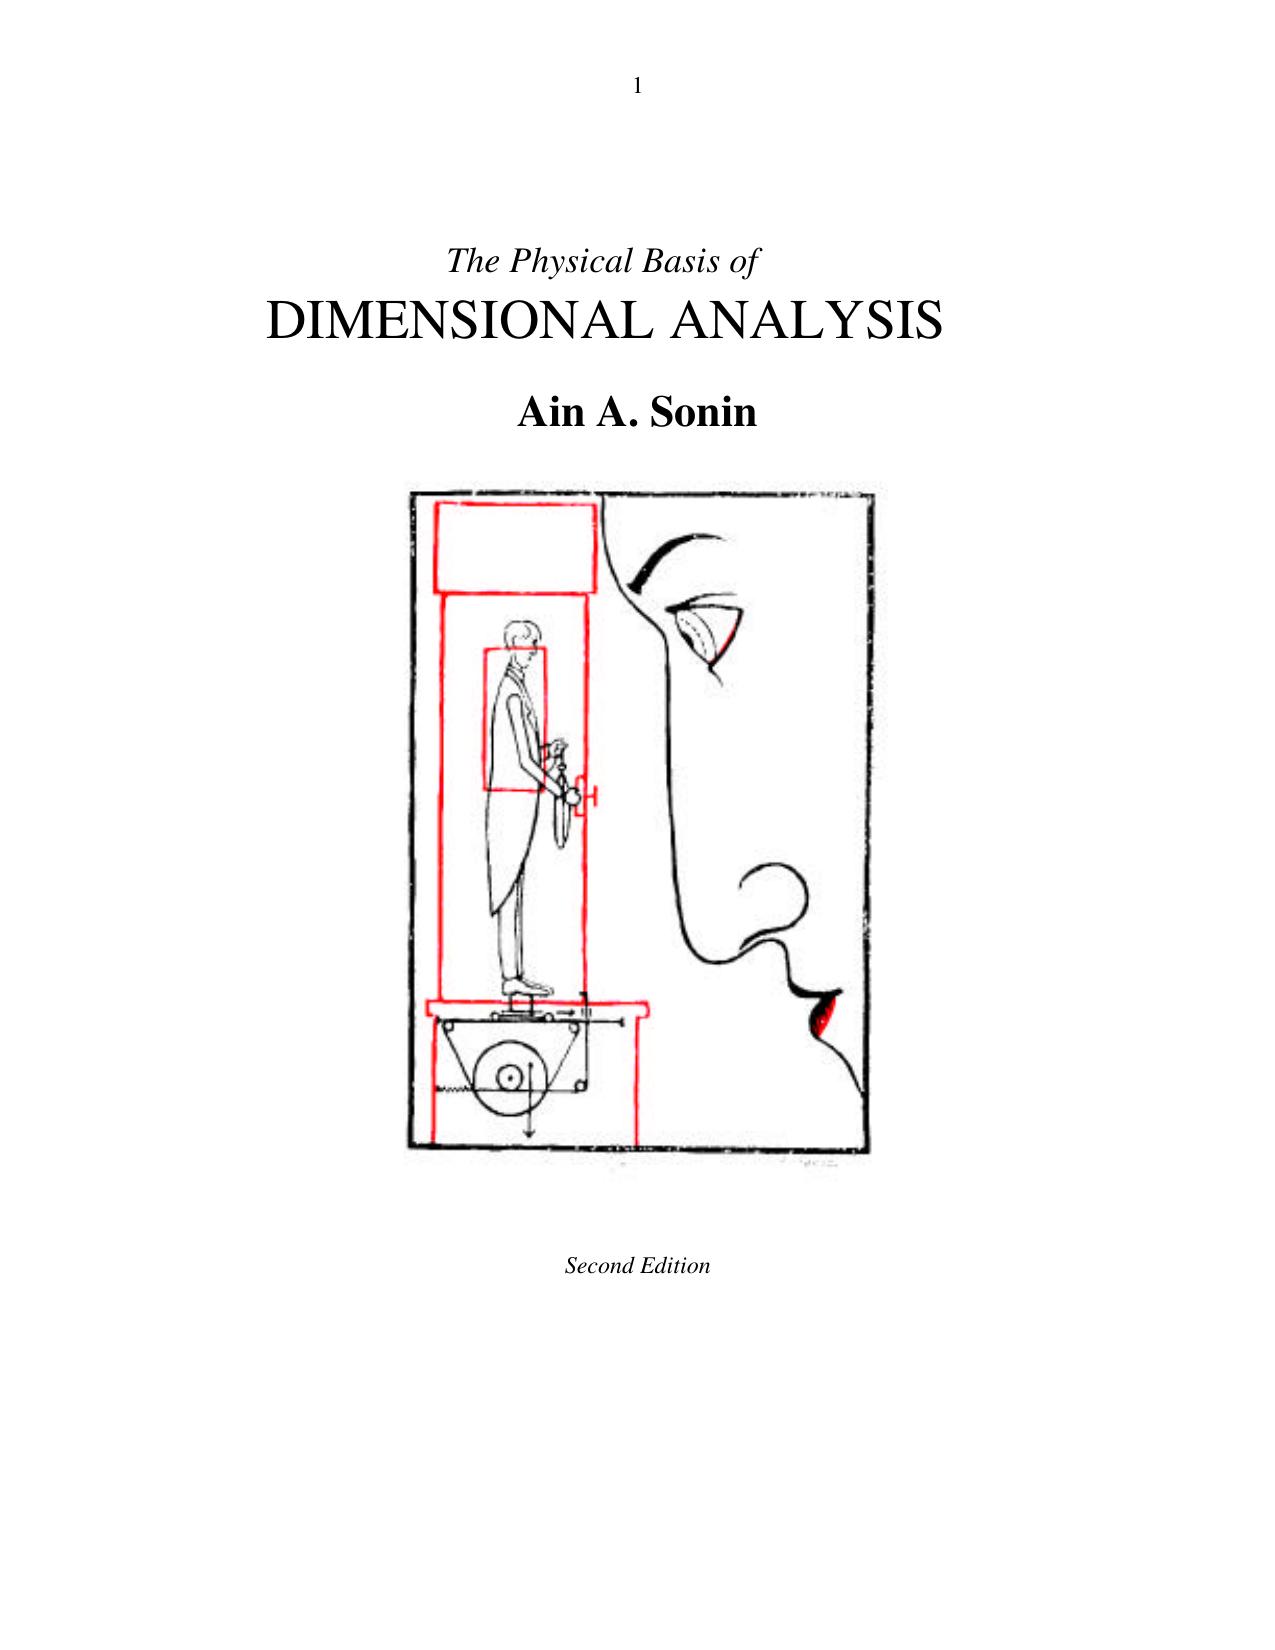 The Physical Basis of Dimensional Analysis